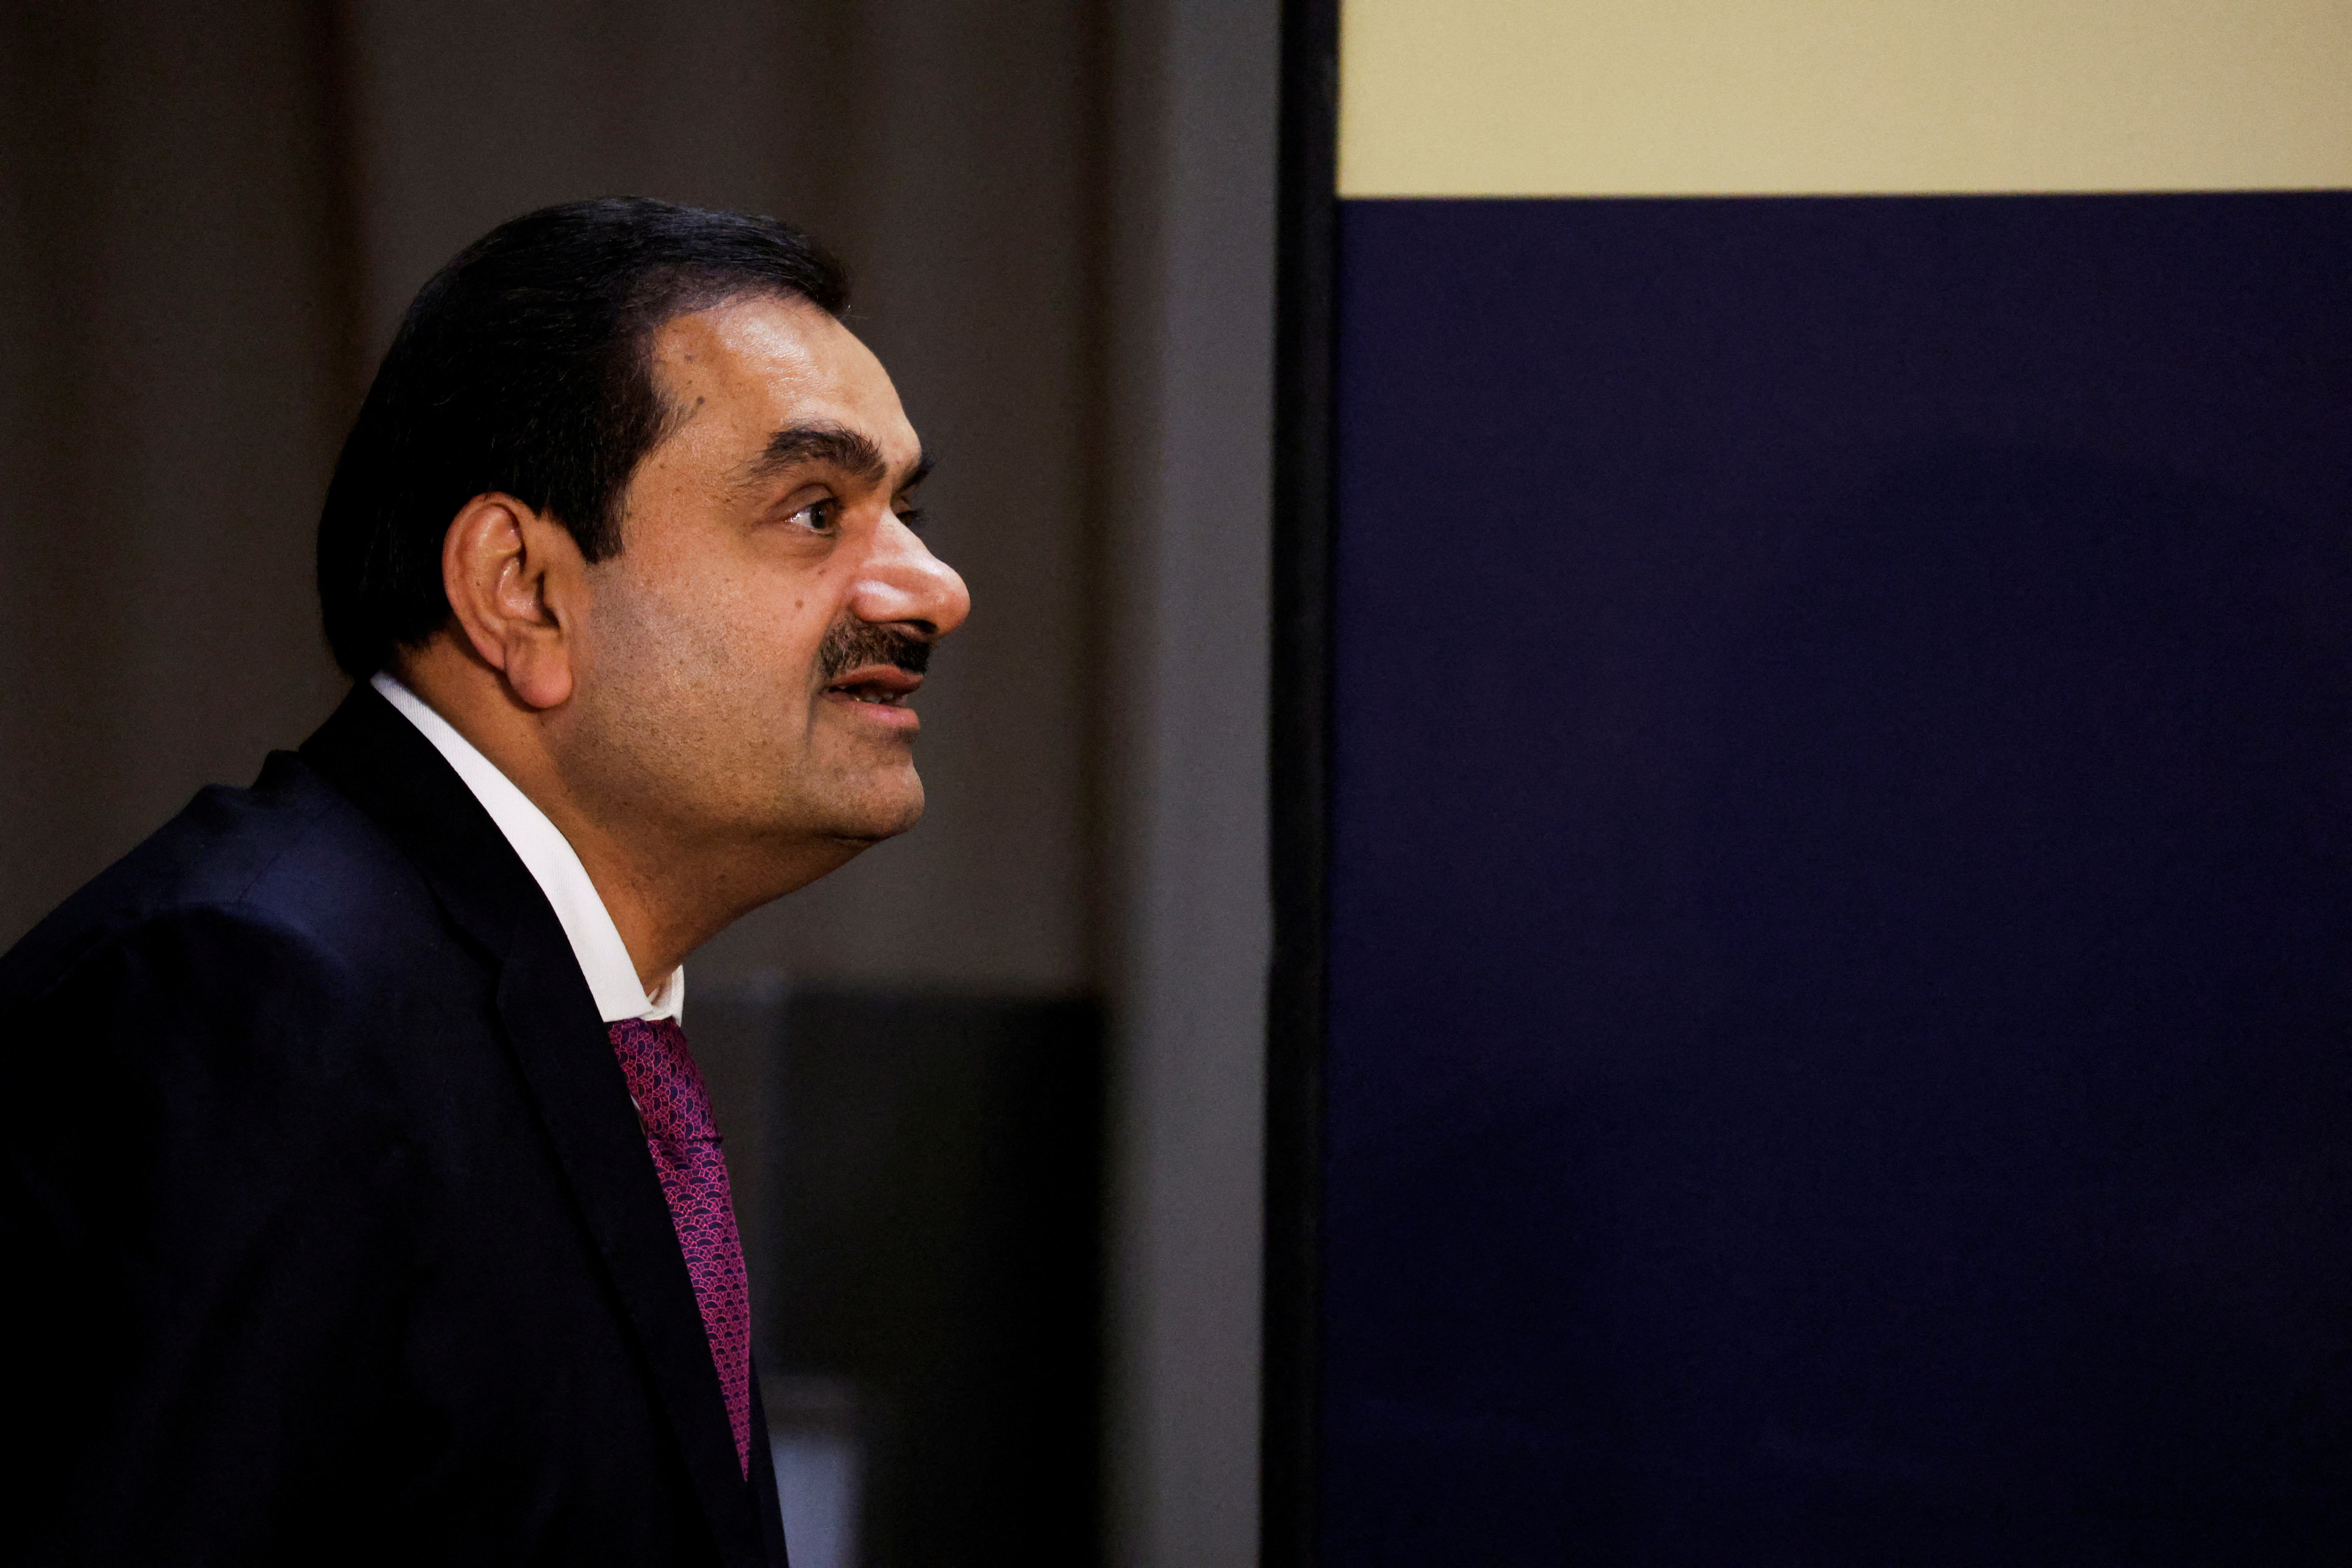 Adani loses Asia“s richest crown as stock wipeout reaches $86 billion